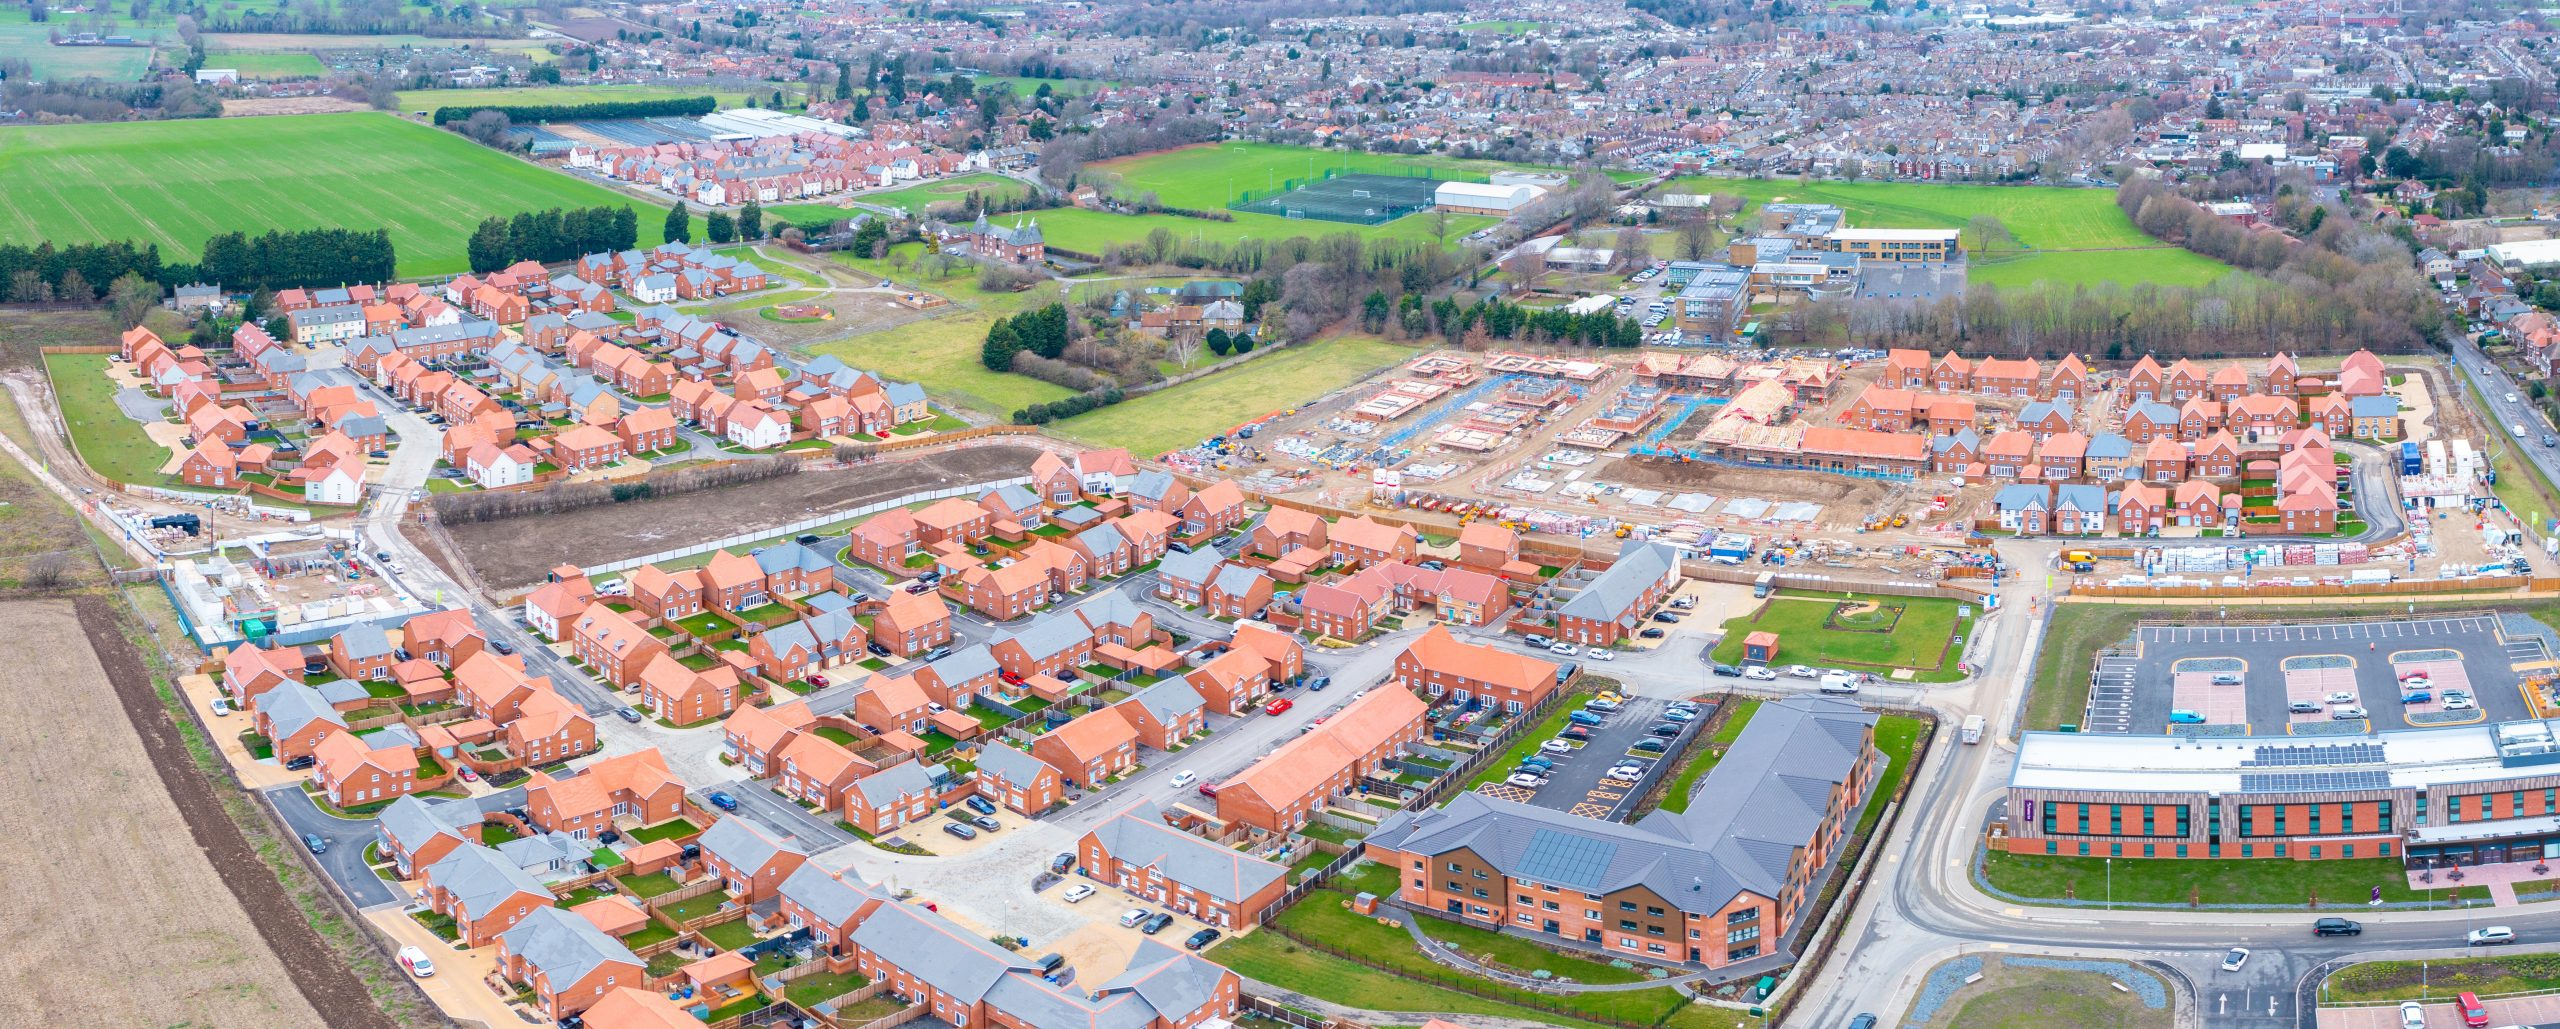 Development of new homes and a care home in Faversham on land promoted by Hallam Land. Aerial.